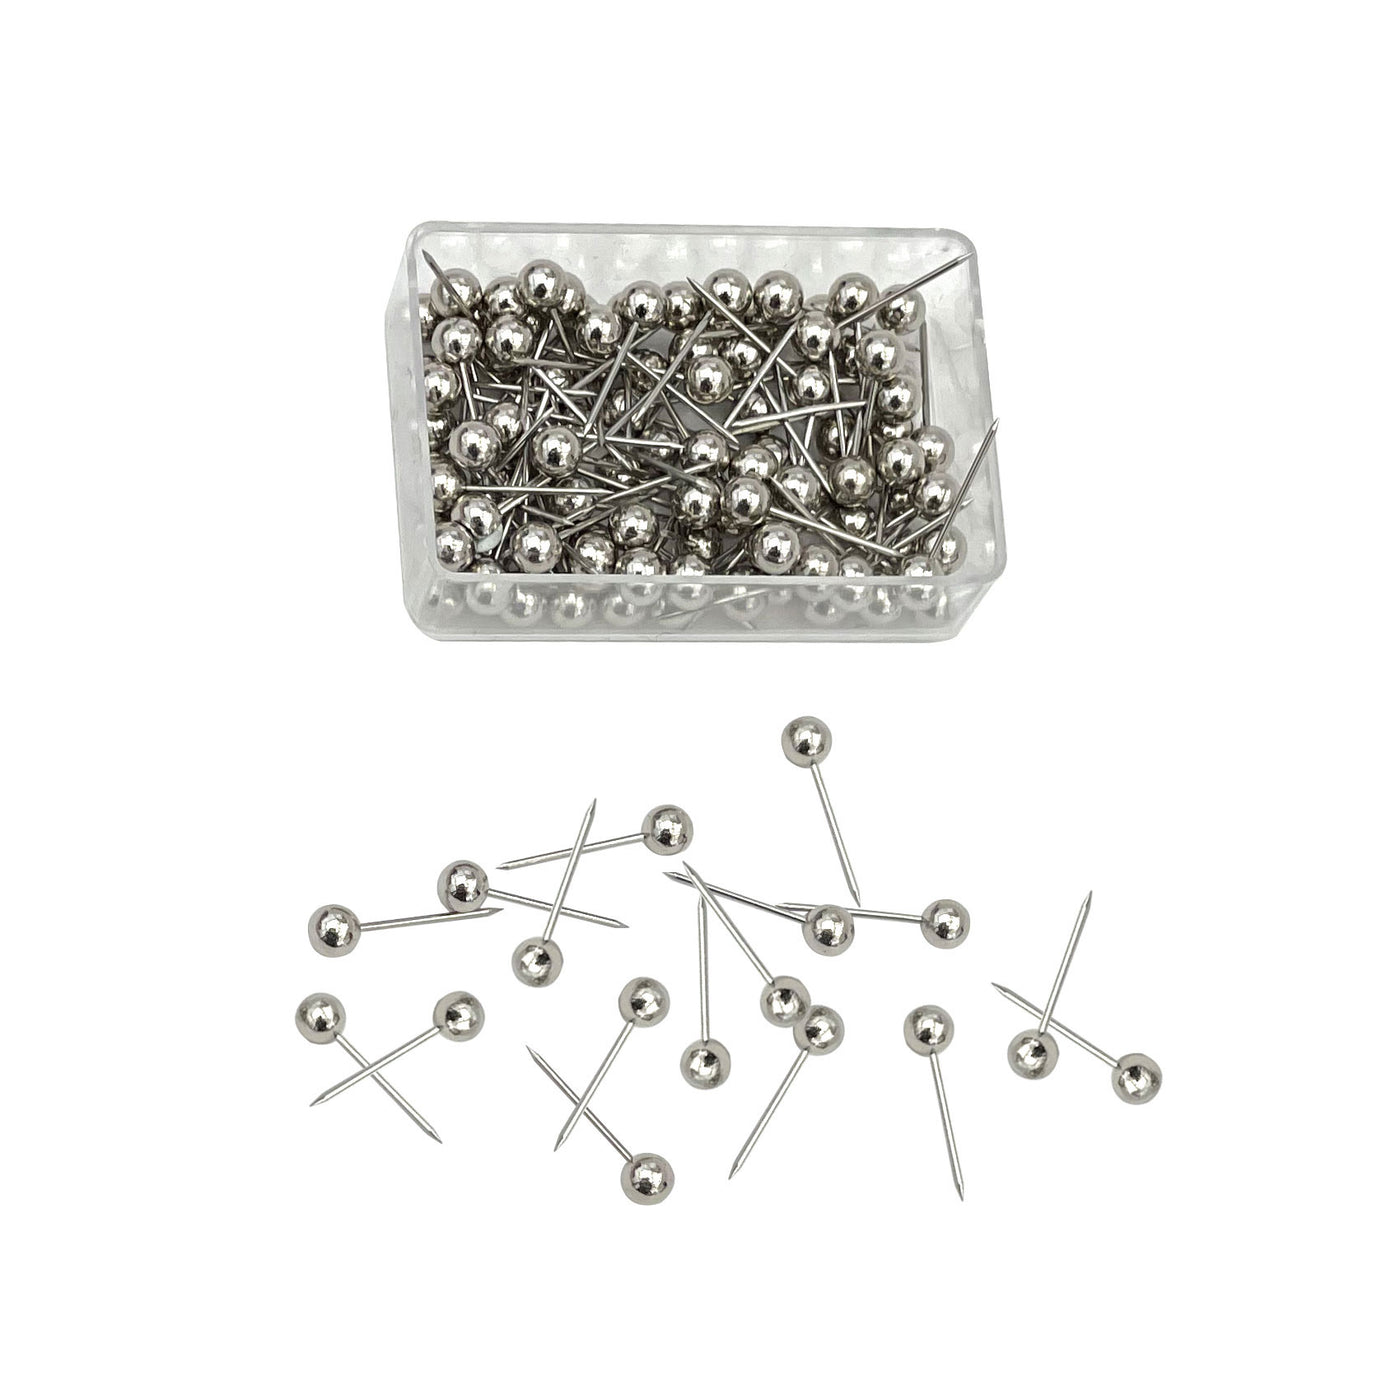 Metallic Silver pins for globes and maps